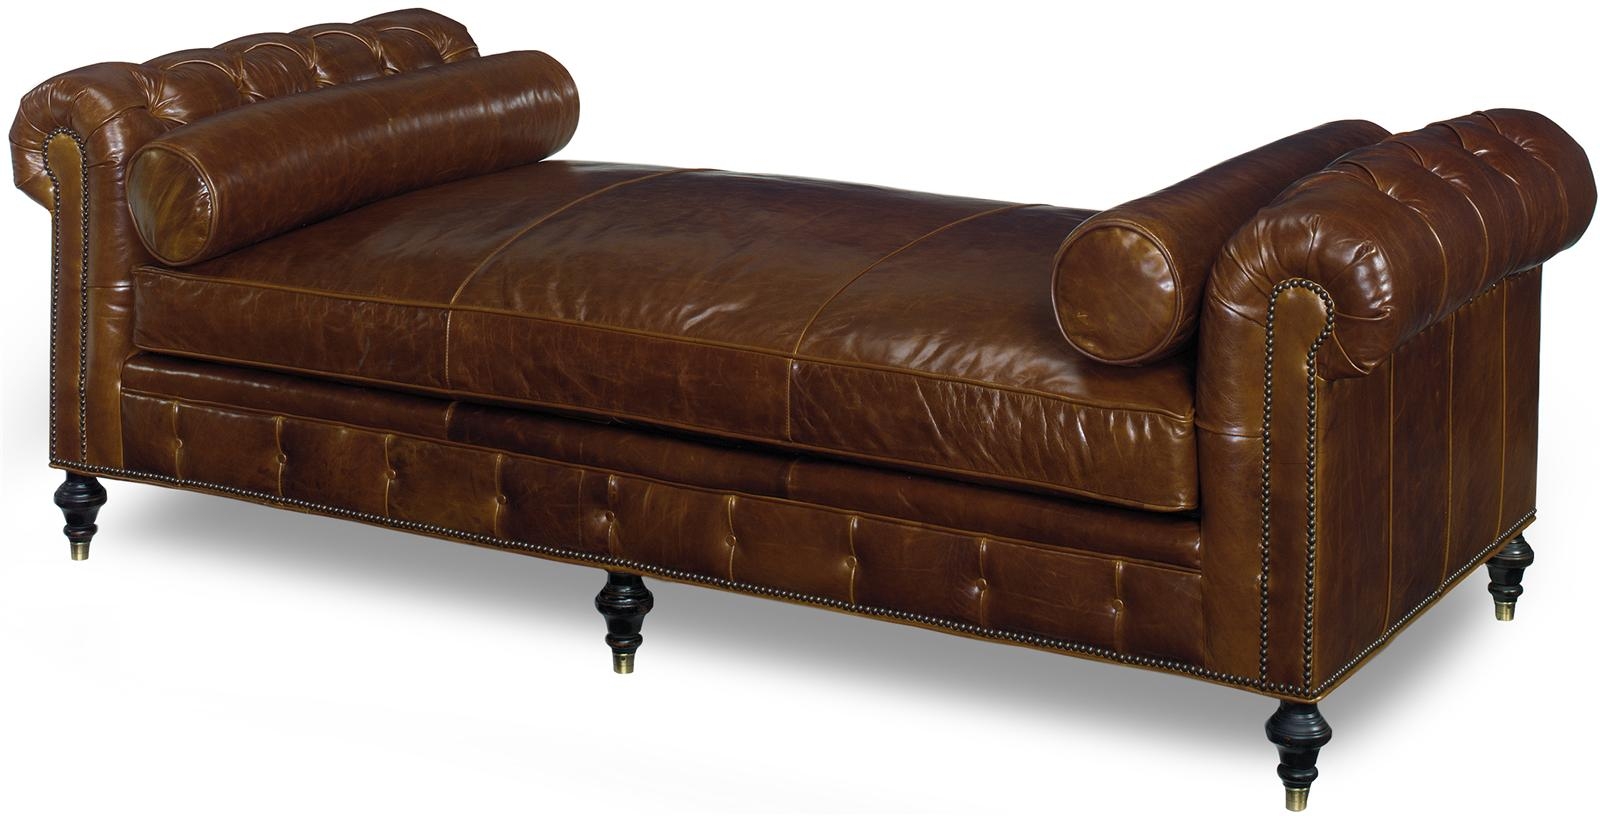 leather chaise longue sofa bed